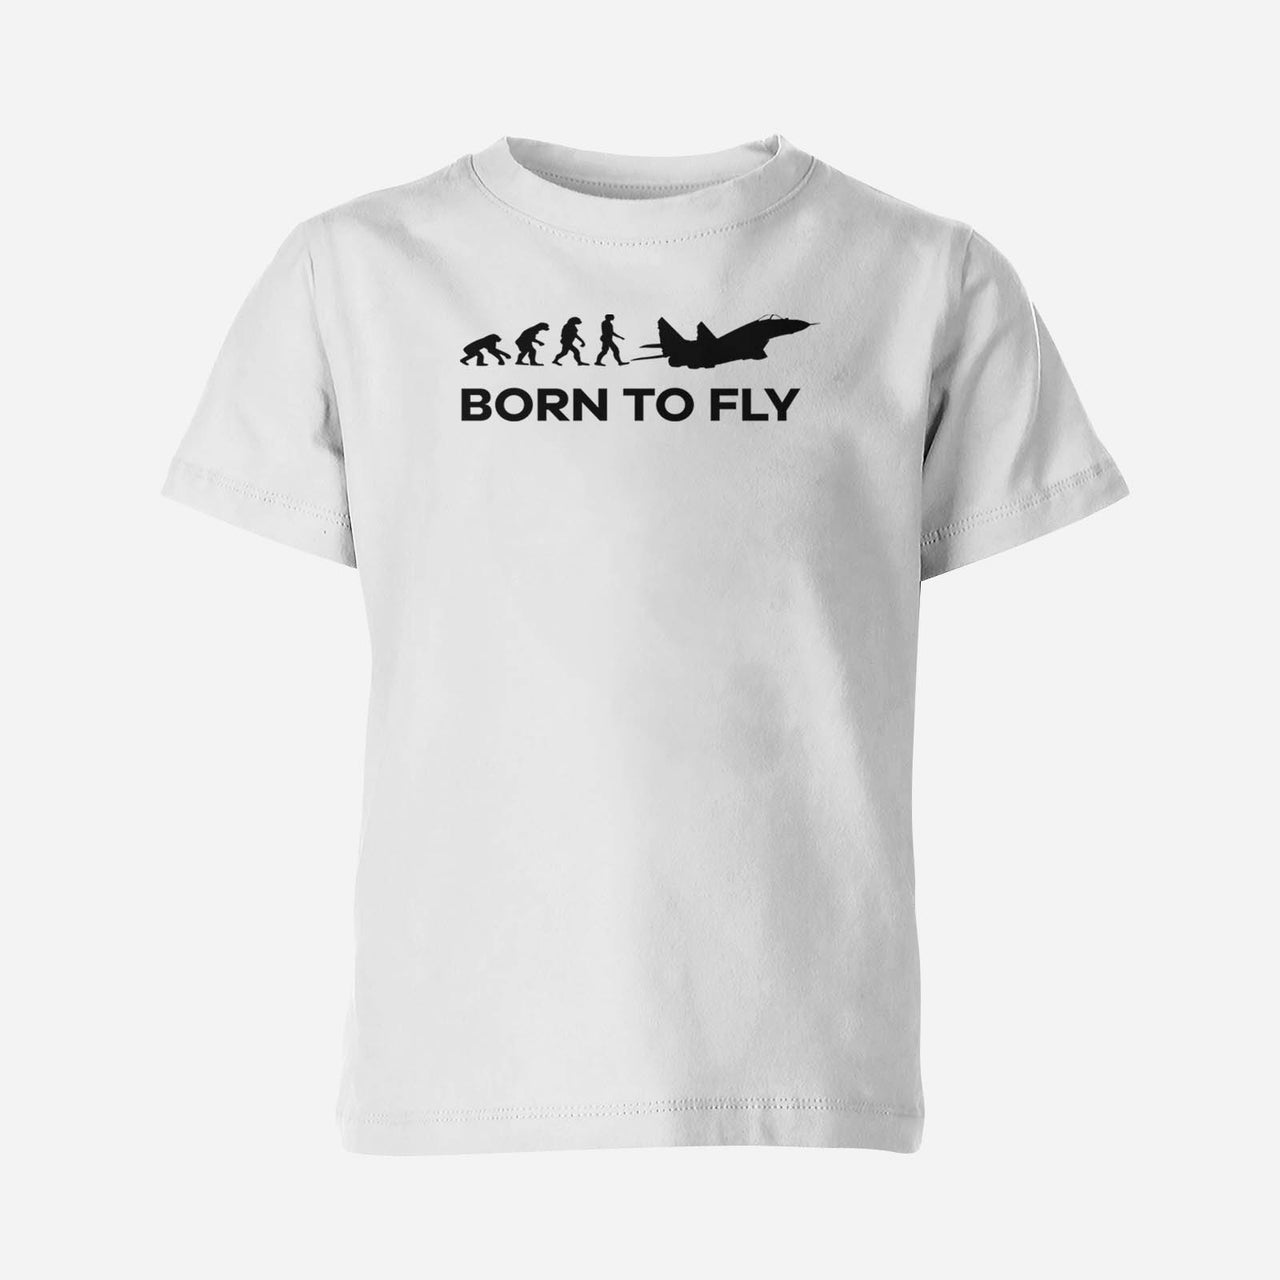 Born To Fly Military Designed Children T-Shirts